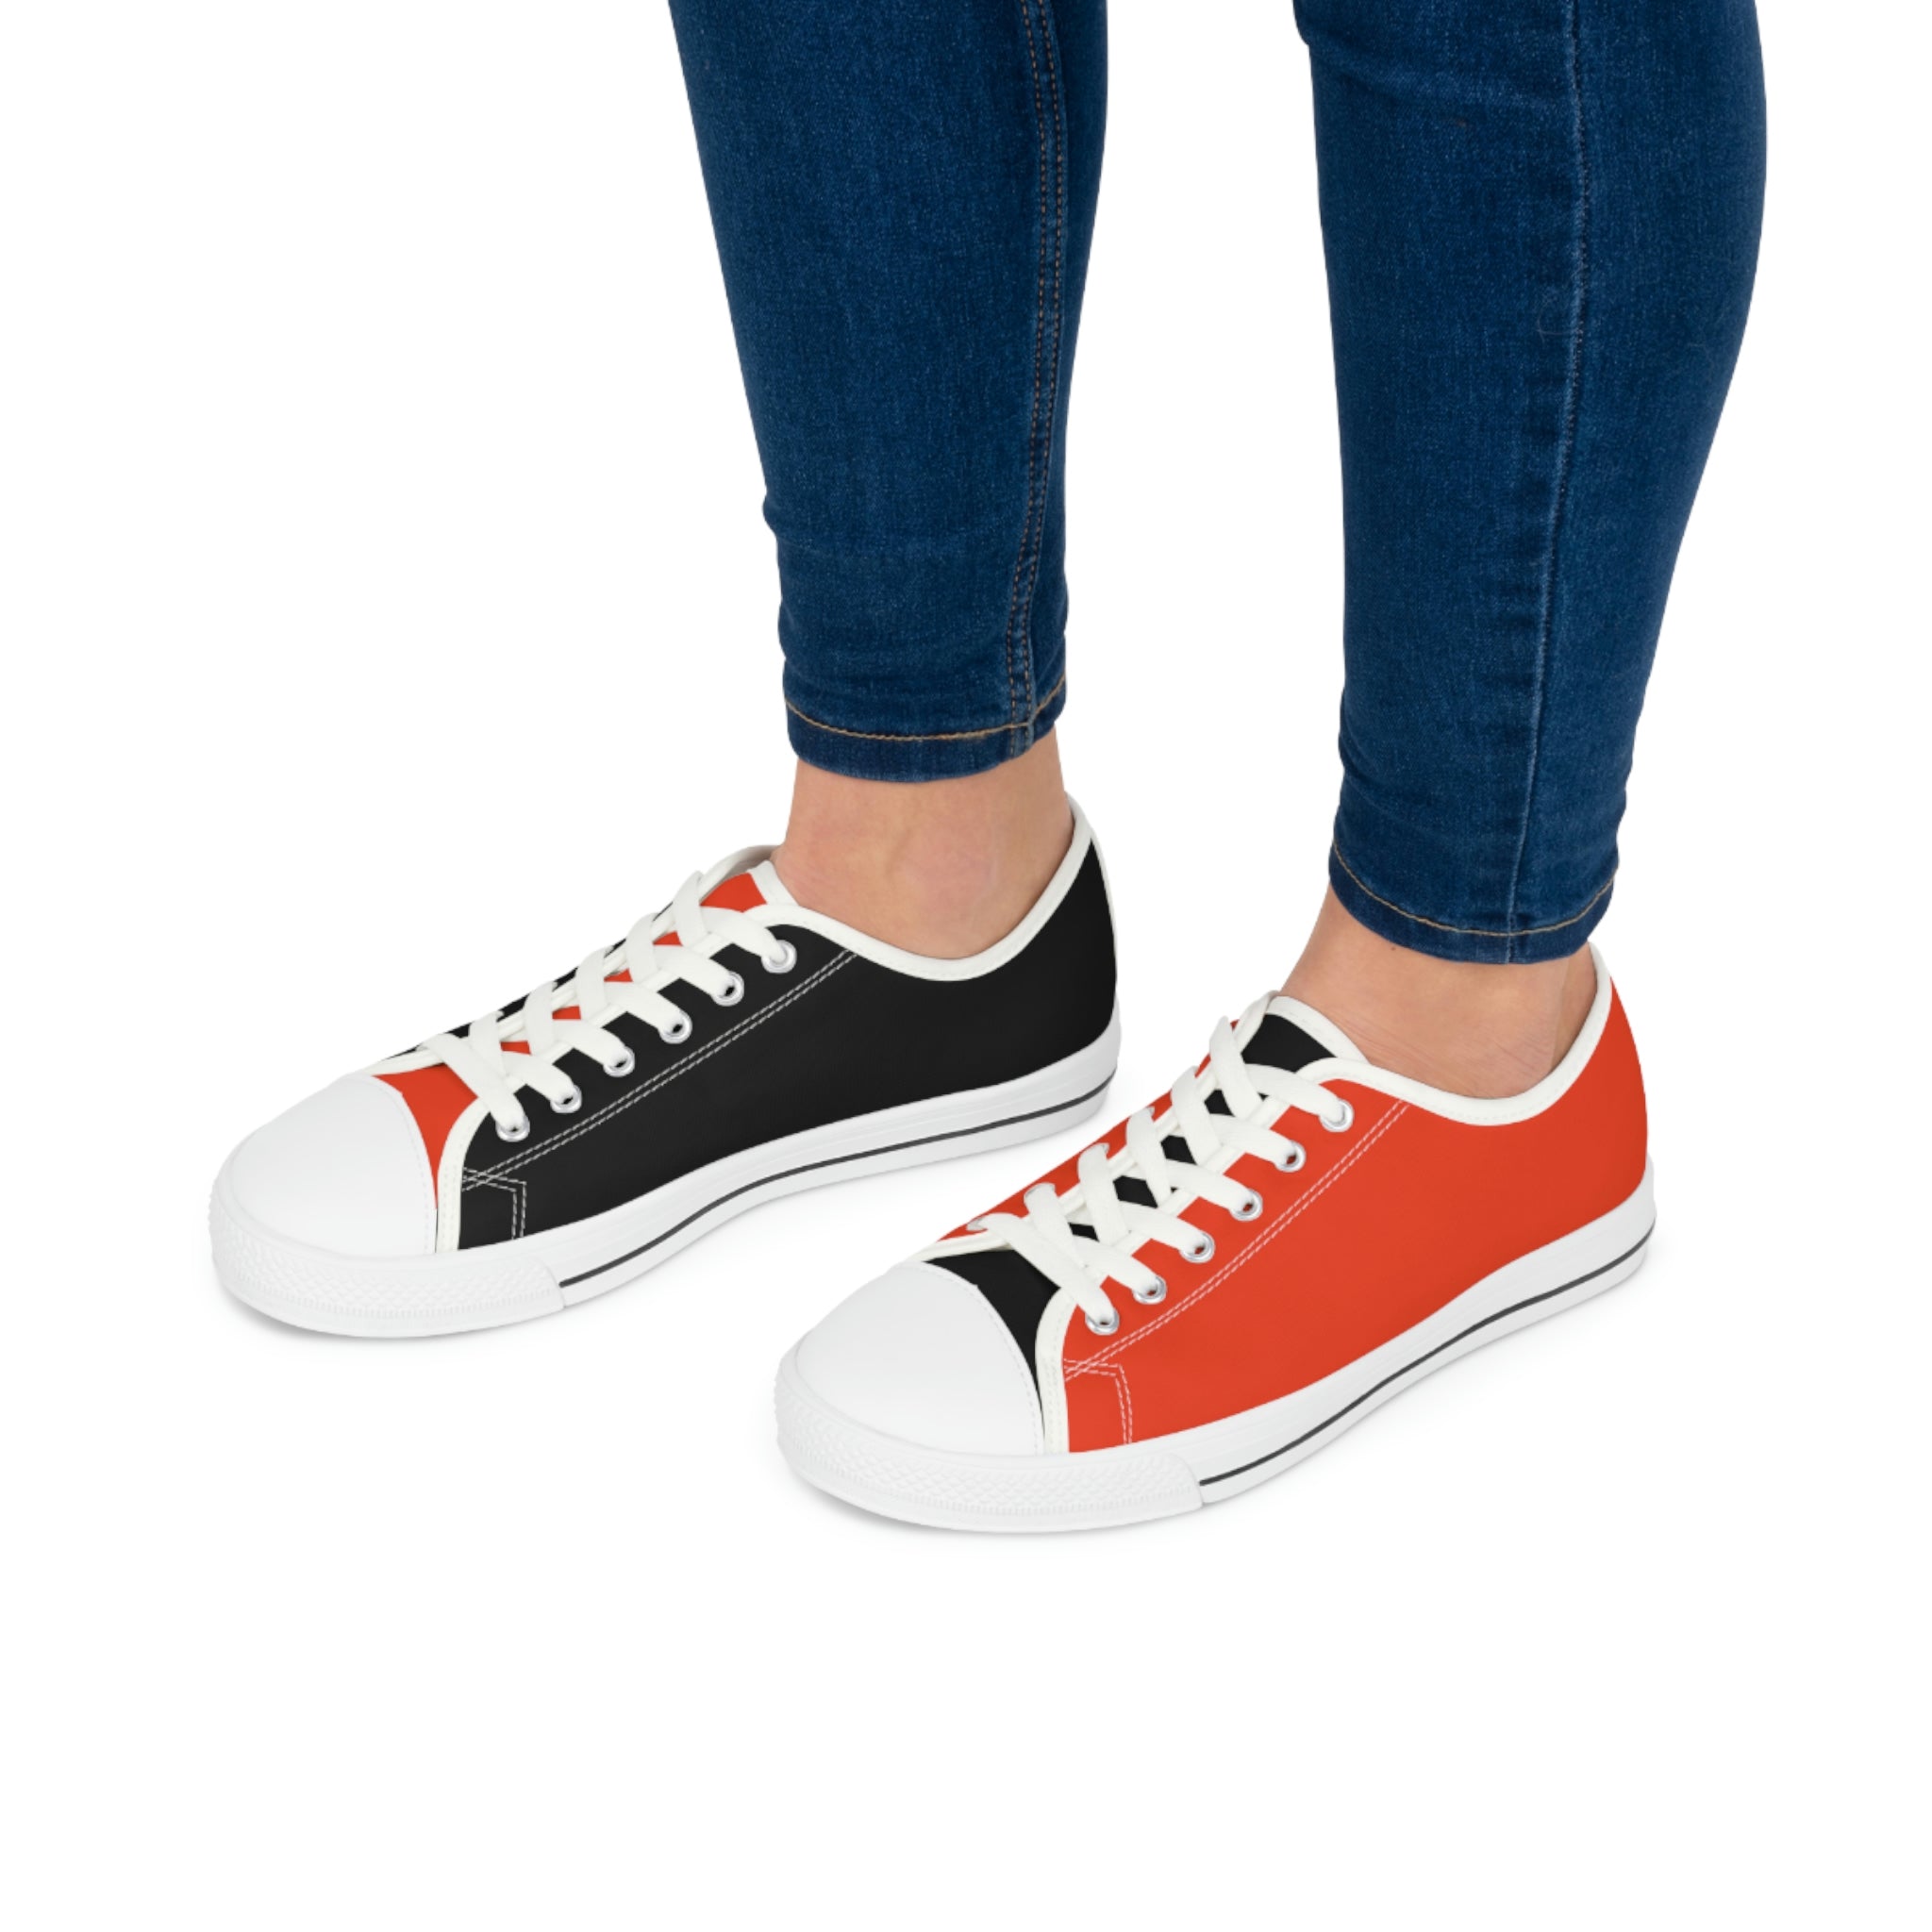 Premium Vector | Vector flat icon a pair of mismatched shoes with  contrasting colors